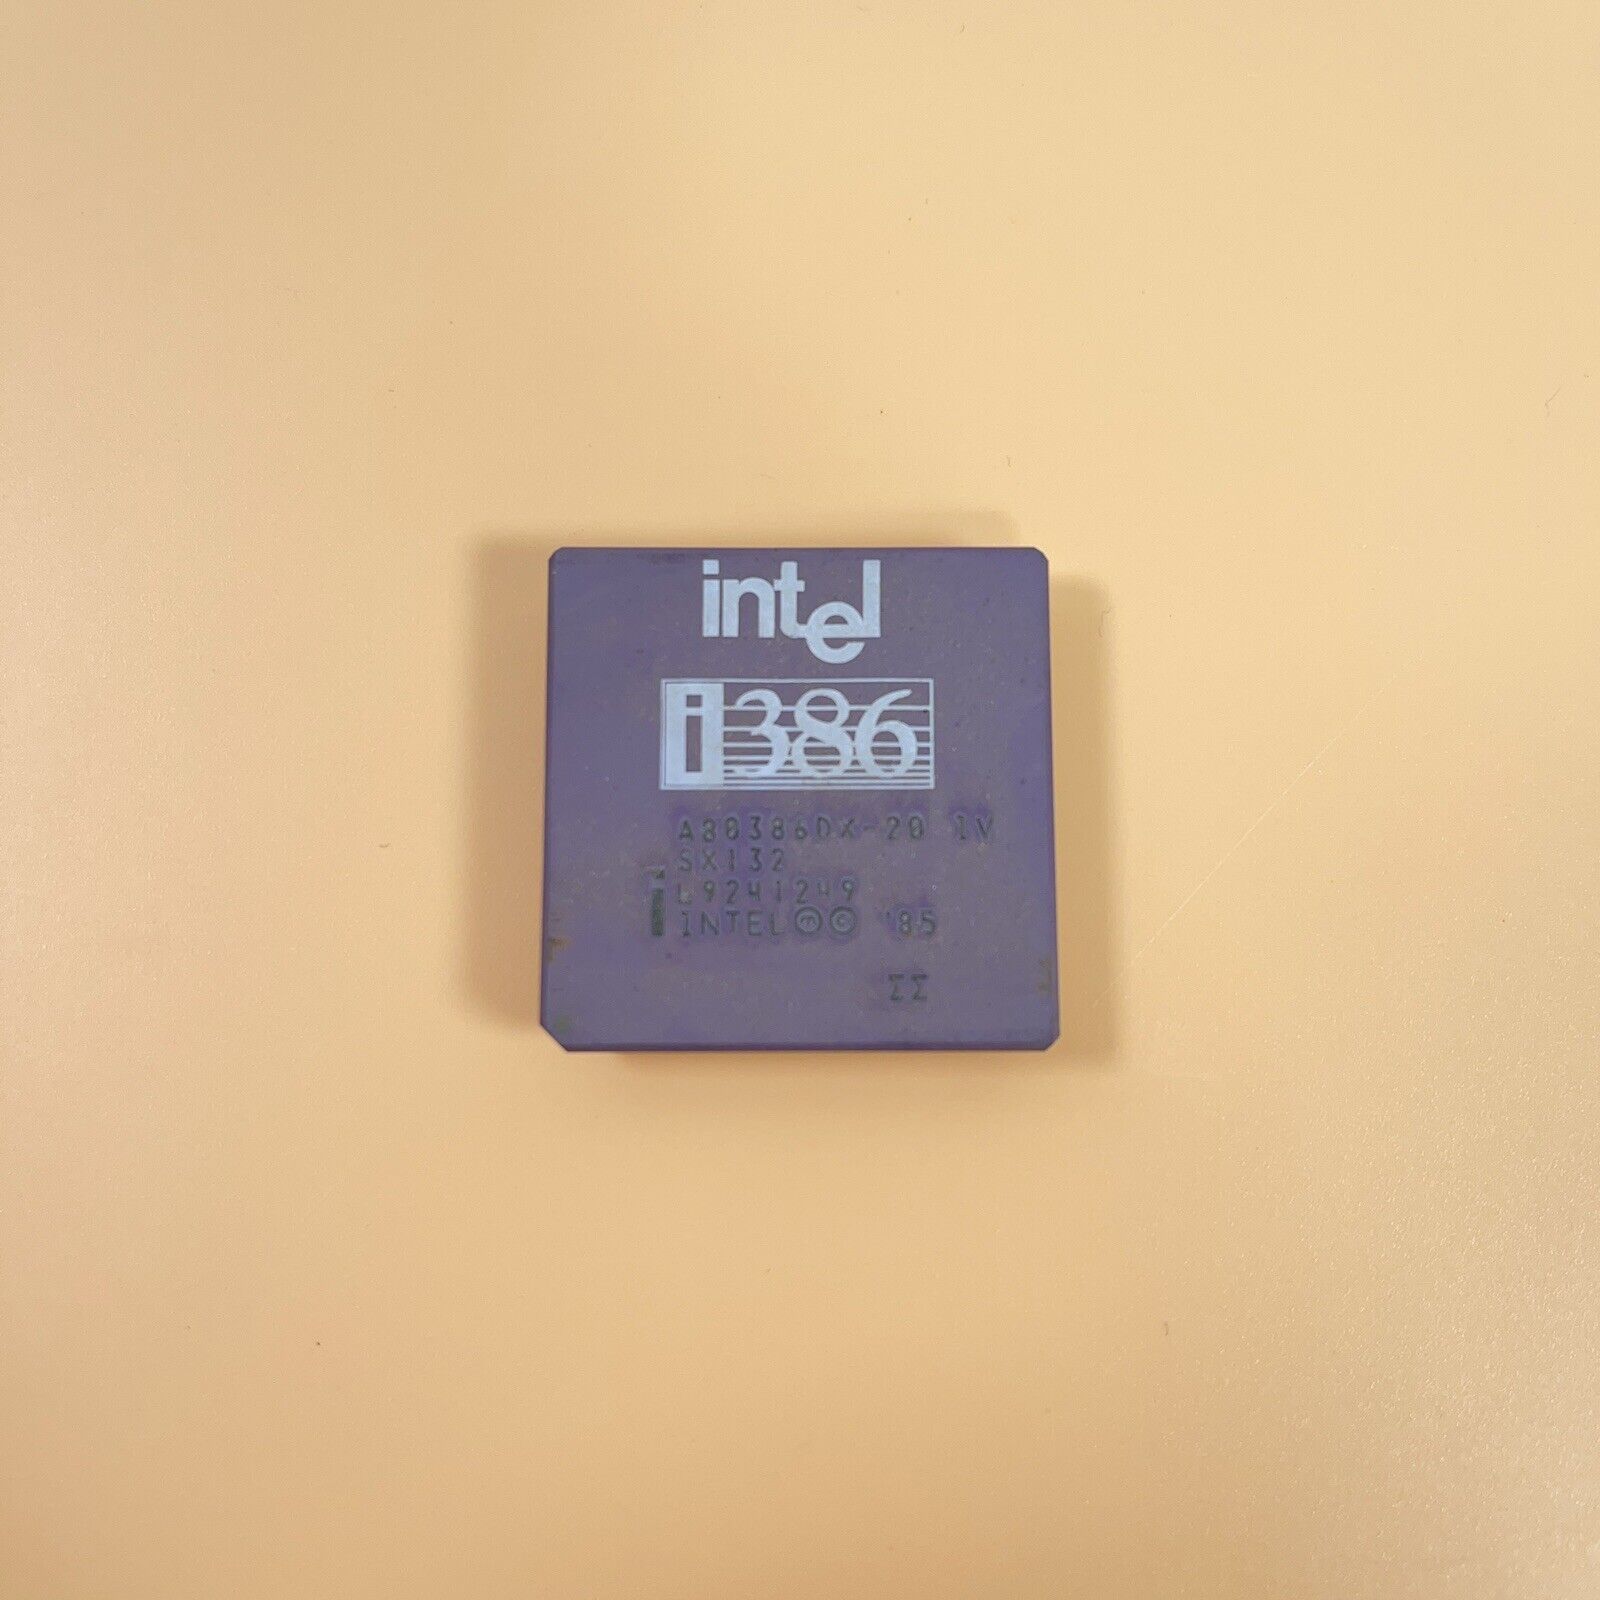 Intel 386 SX132 A80386DX 25 MHz CPU Processor Vintage 1985 Chip with Gold Pins